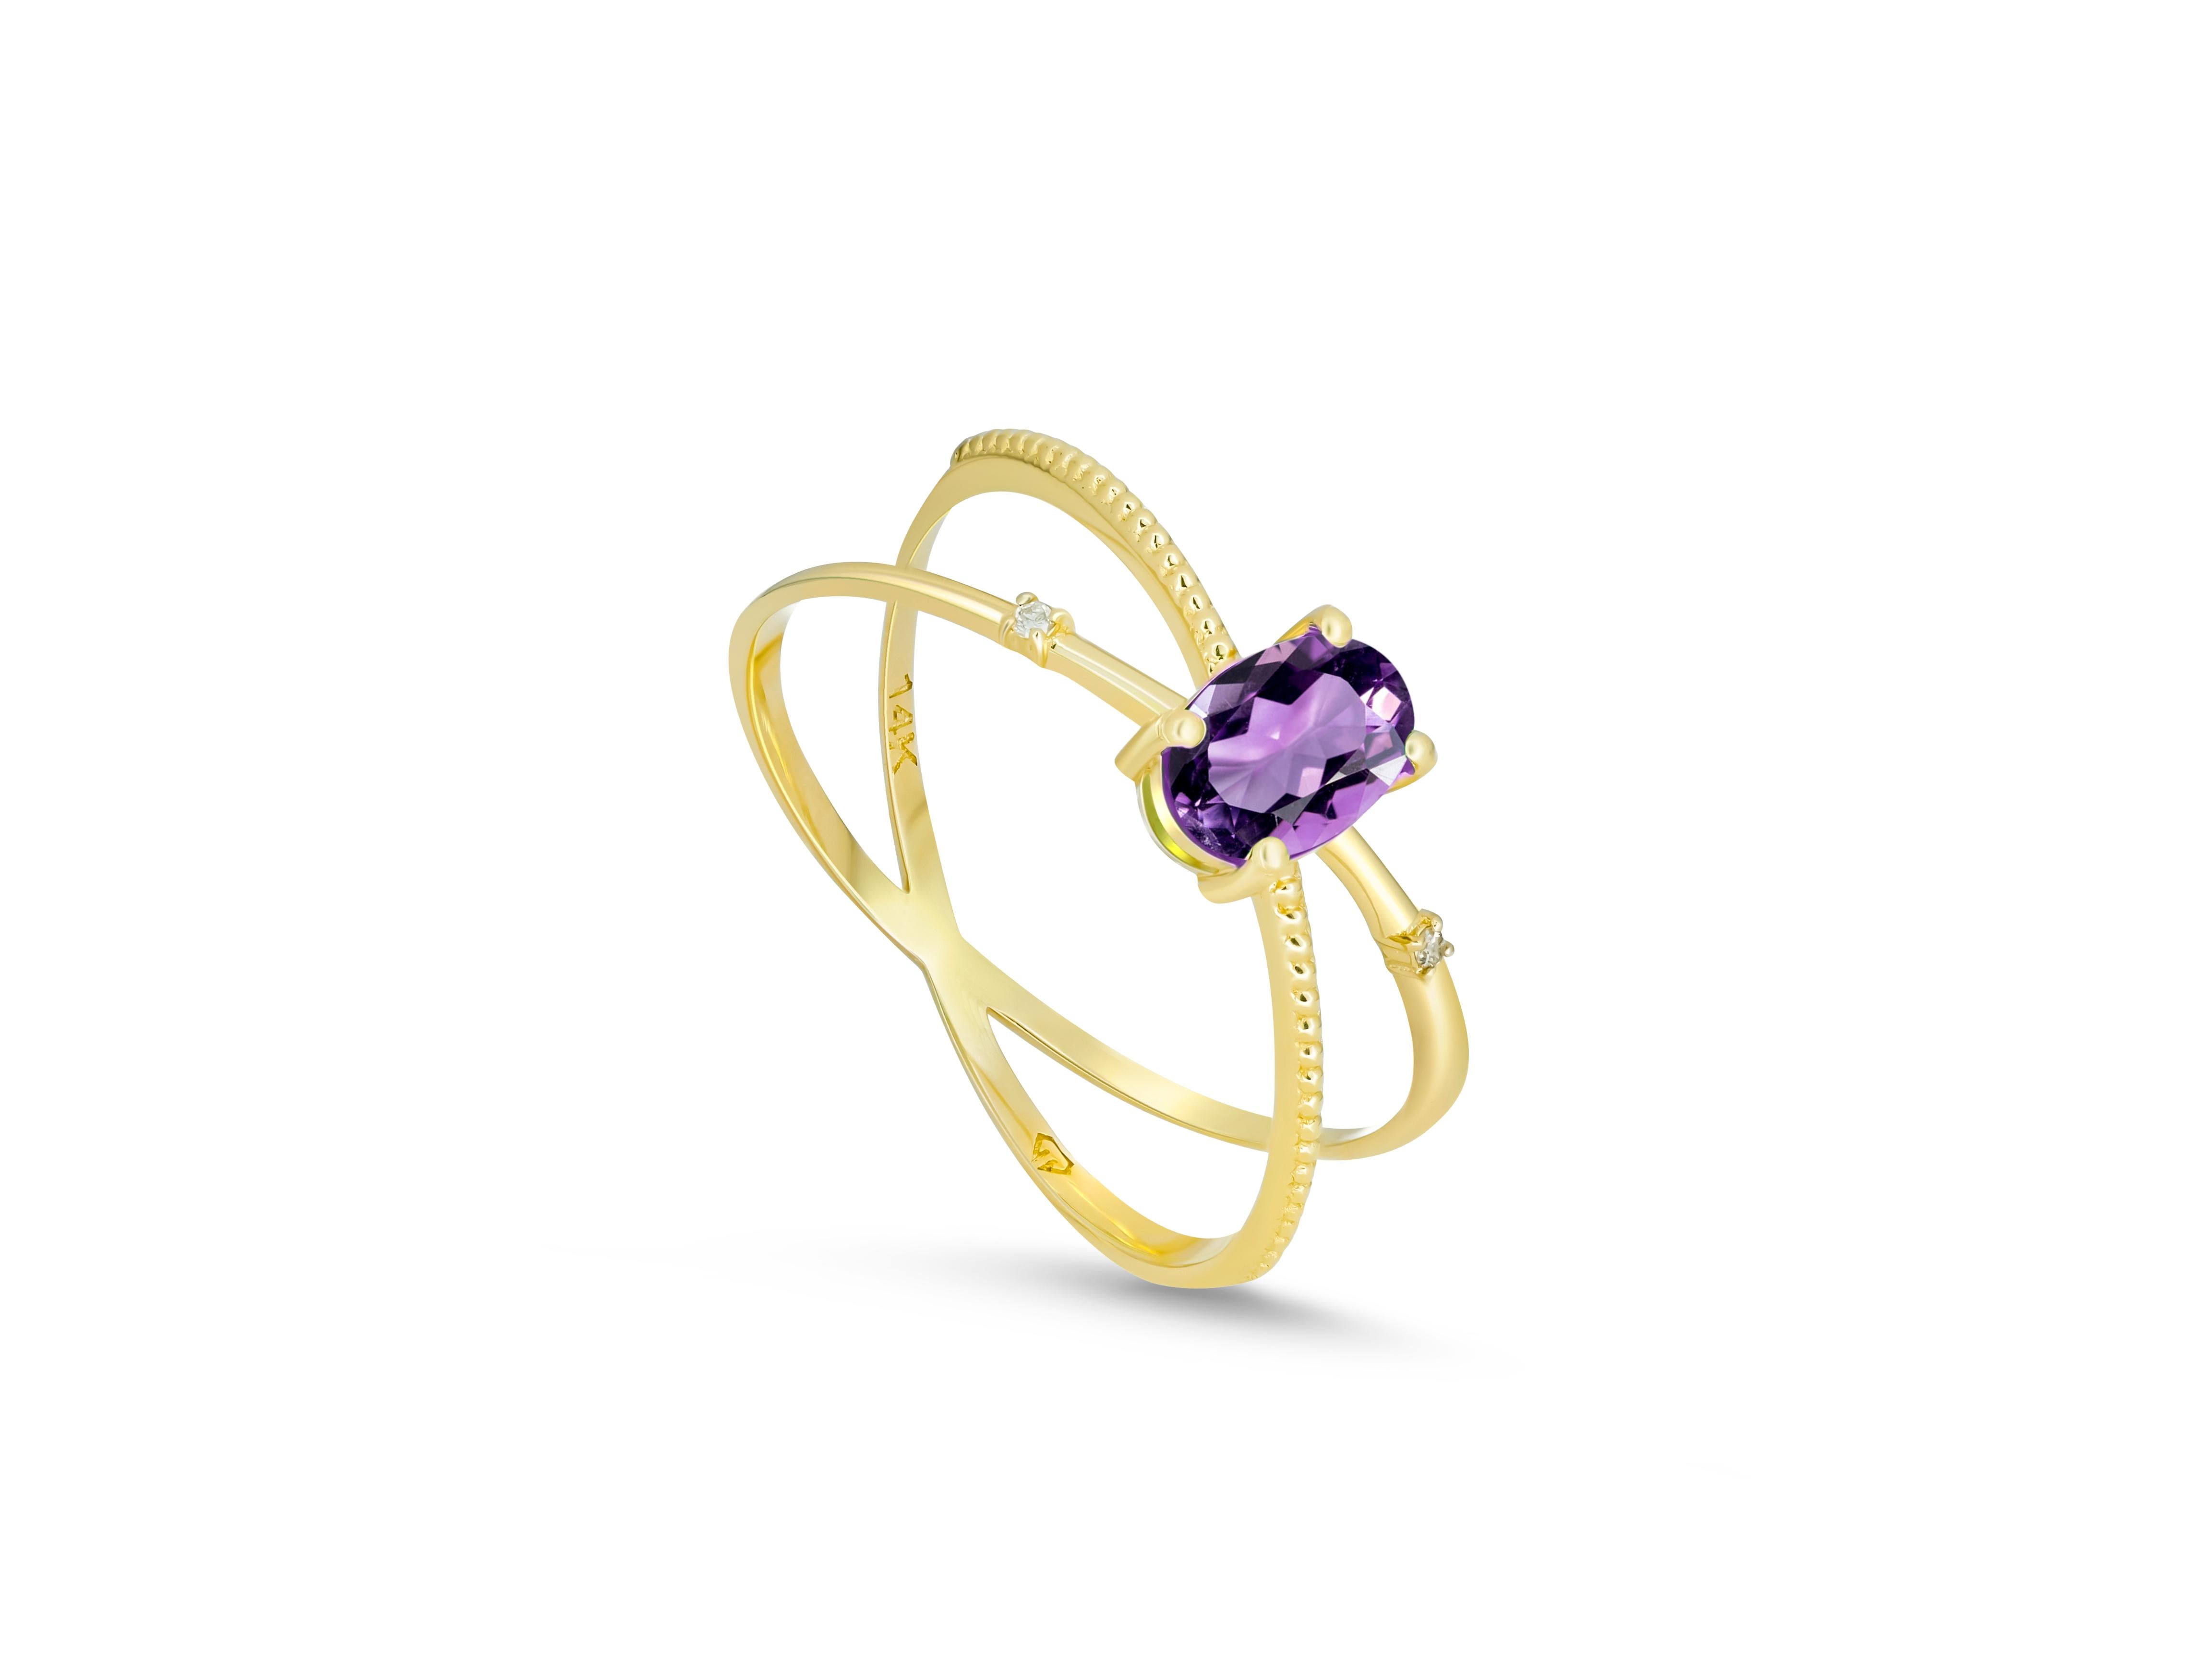 Amethyst spiral ring. 
Oval Amethyst ring. Amethyst 14k gold ring. Minimalist Amethyst ring. February Birthstone Ring. Casual amethyst ring.

Metal: 14k gold
Total weight: 1.9 g  depends from size

Main Stone: Amethyst
Shape: Oval  
Total Carat